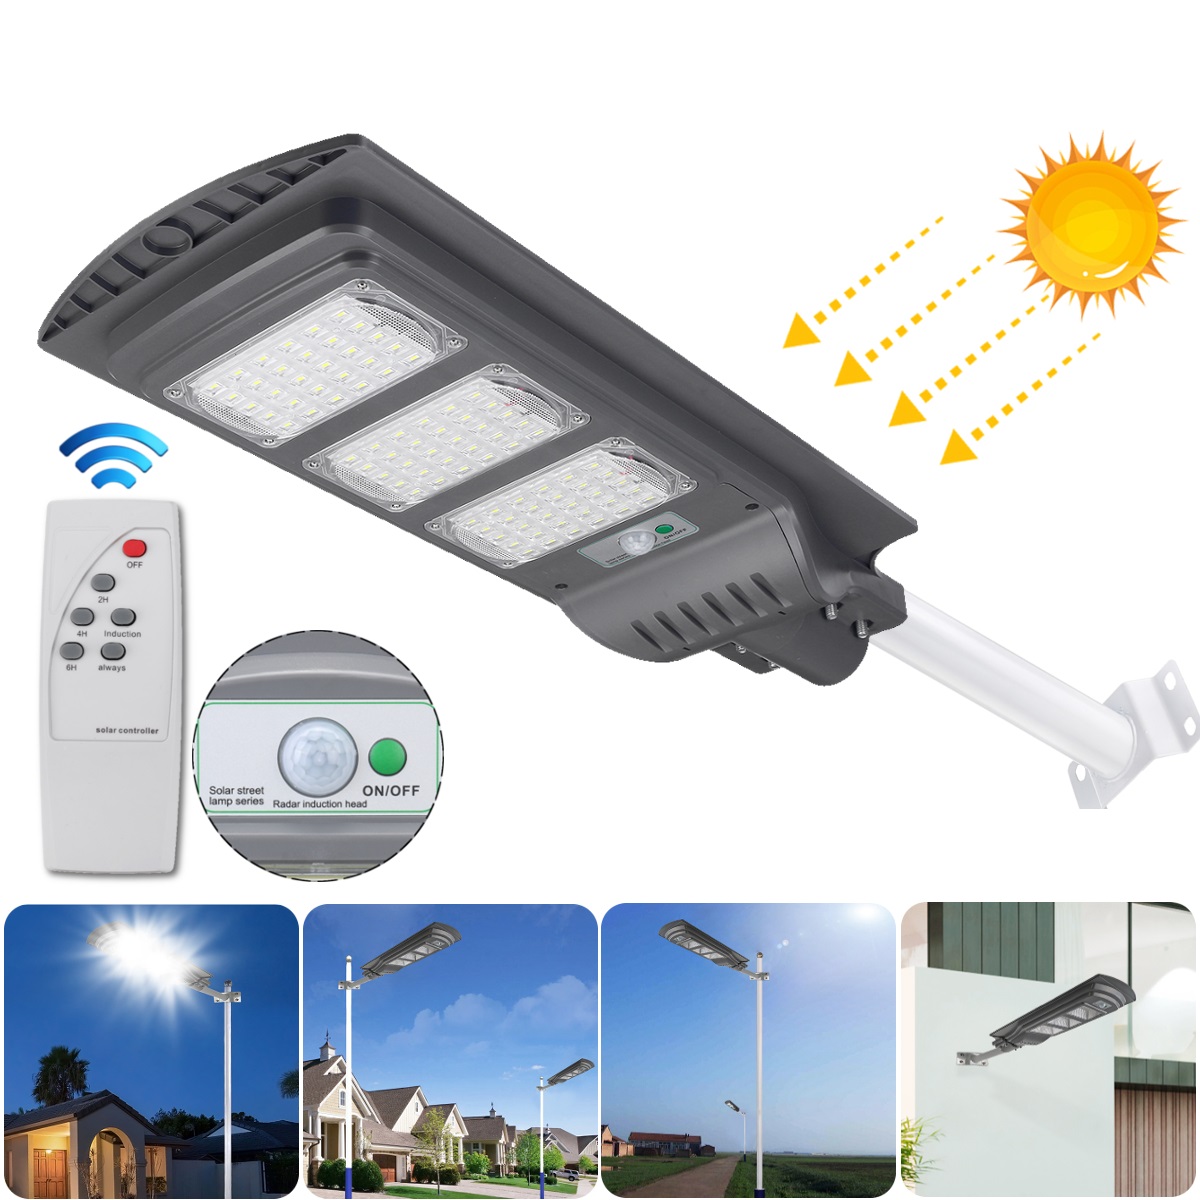 Find 40/80/120W LED Solar Street Wall Light PIR Motion Sensor Security Lamp Remote Control for Sale on Gipsybee.com with cryptocurrencies